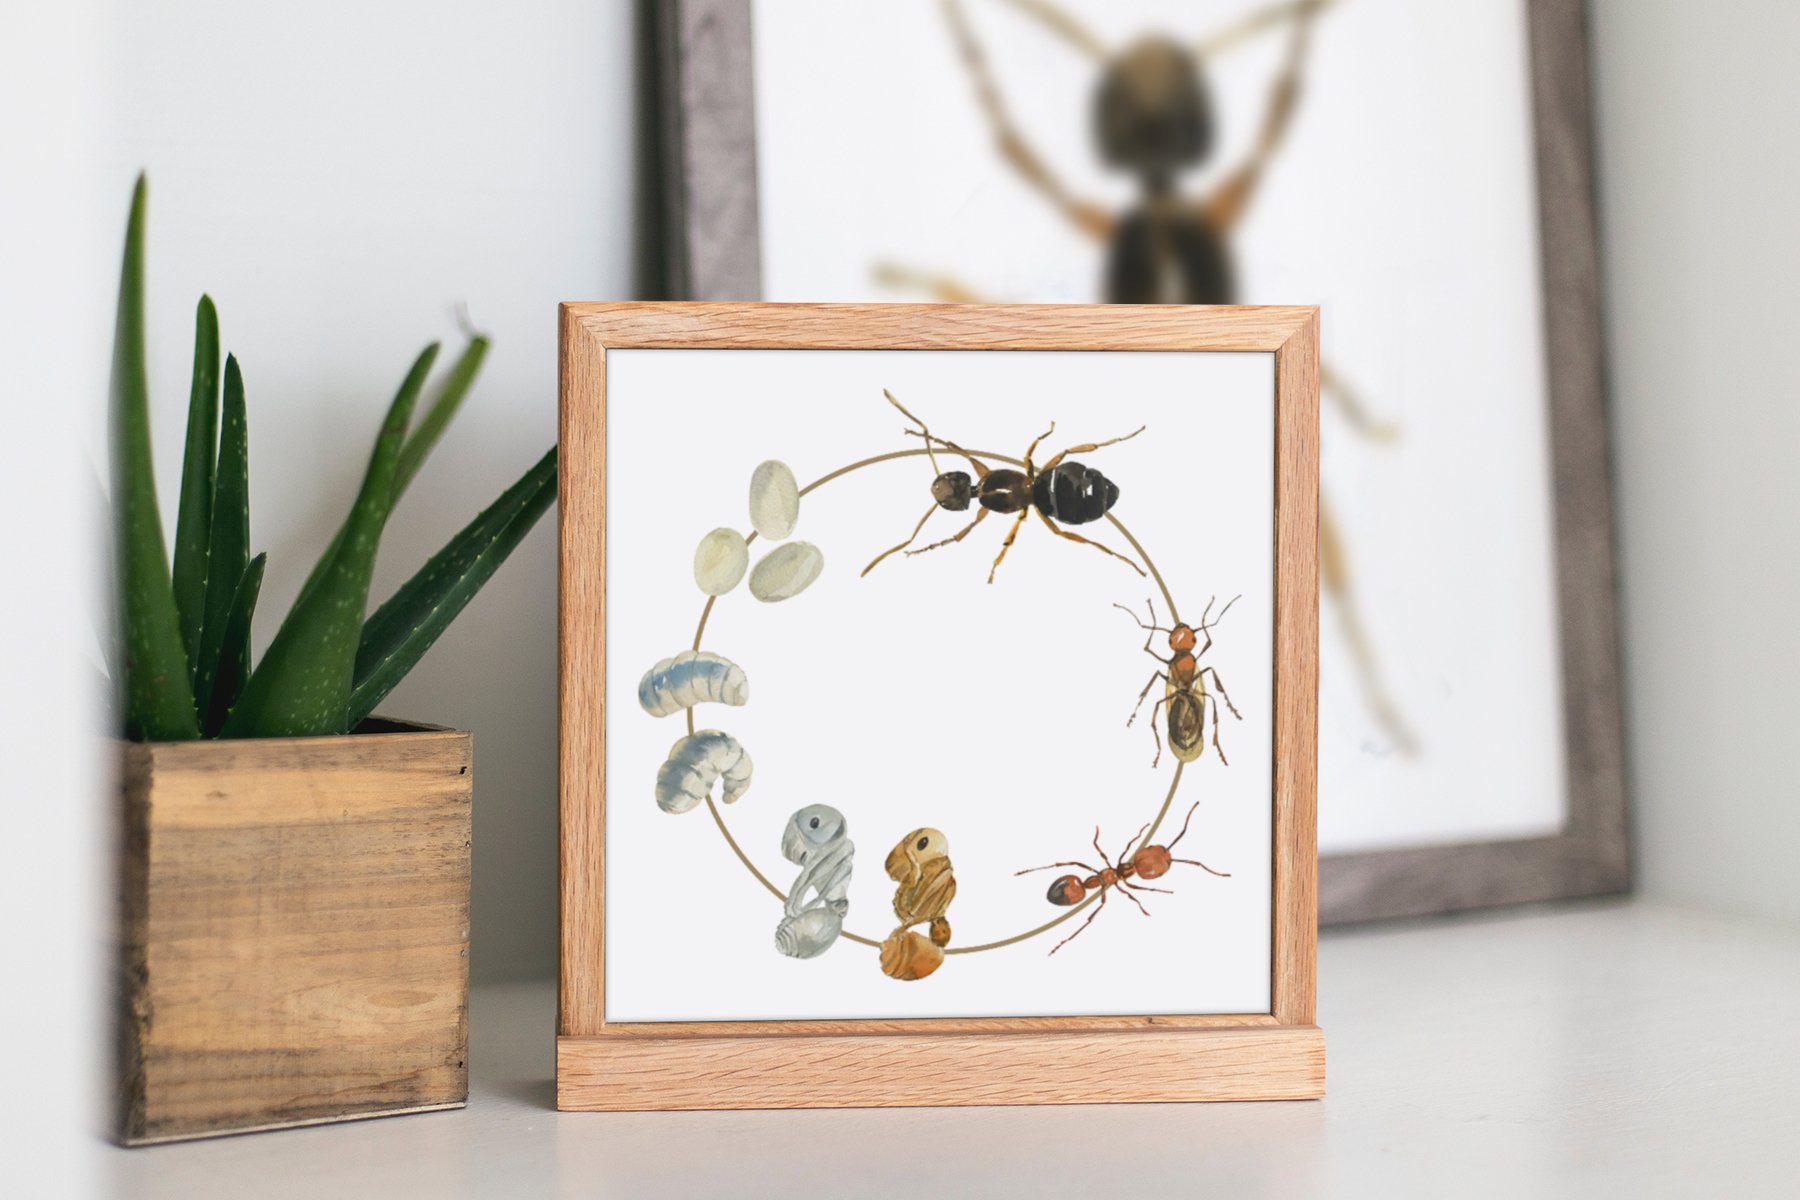 Small ant life cycle poster with wooden frame.